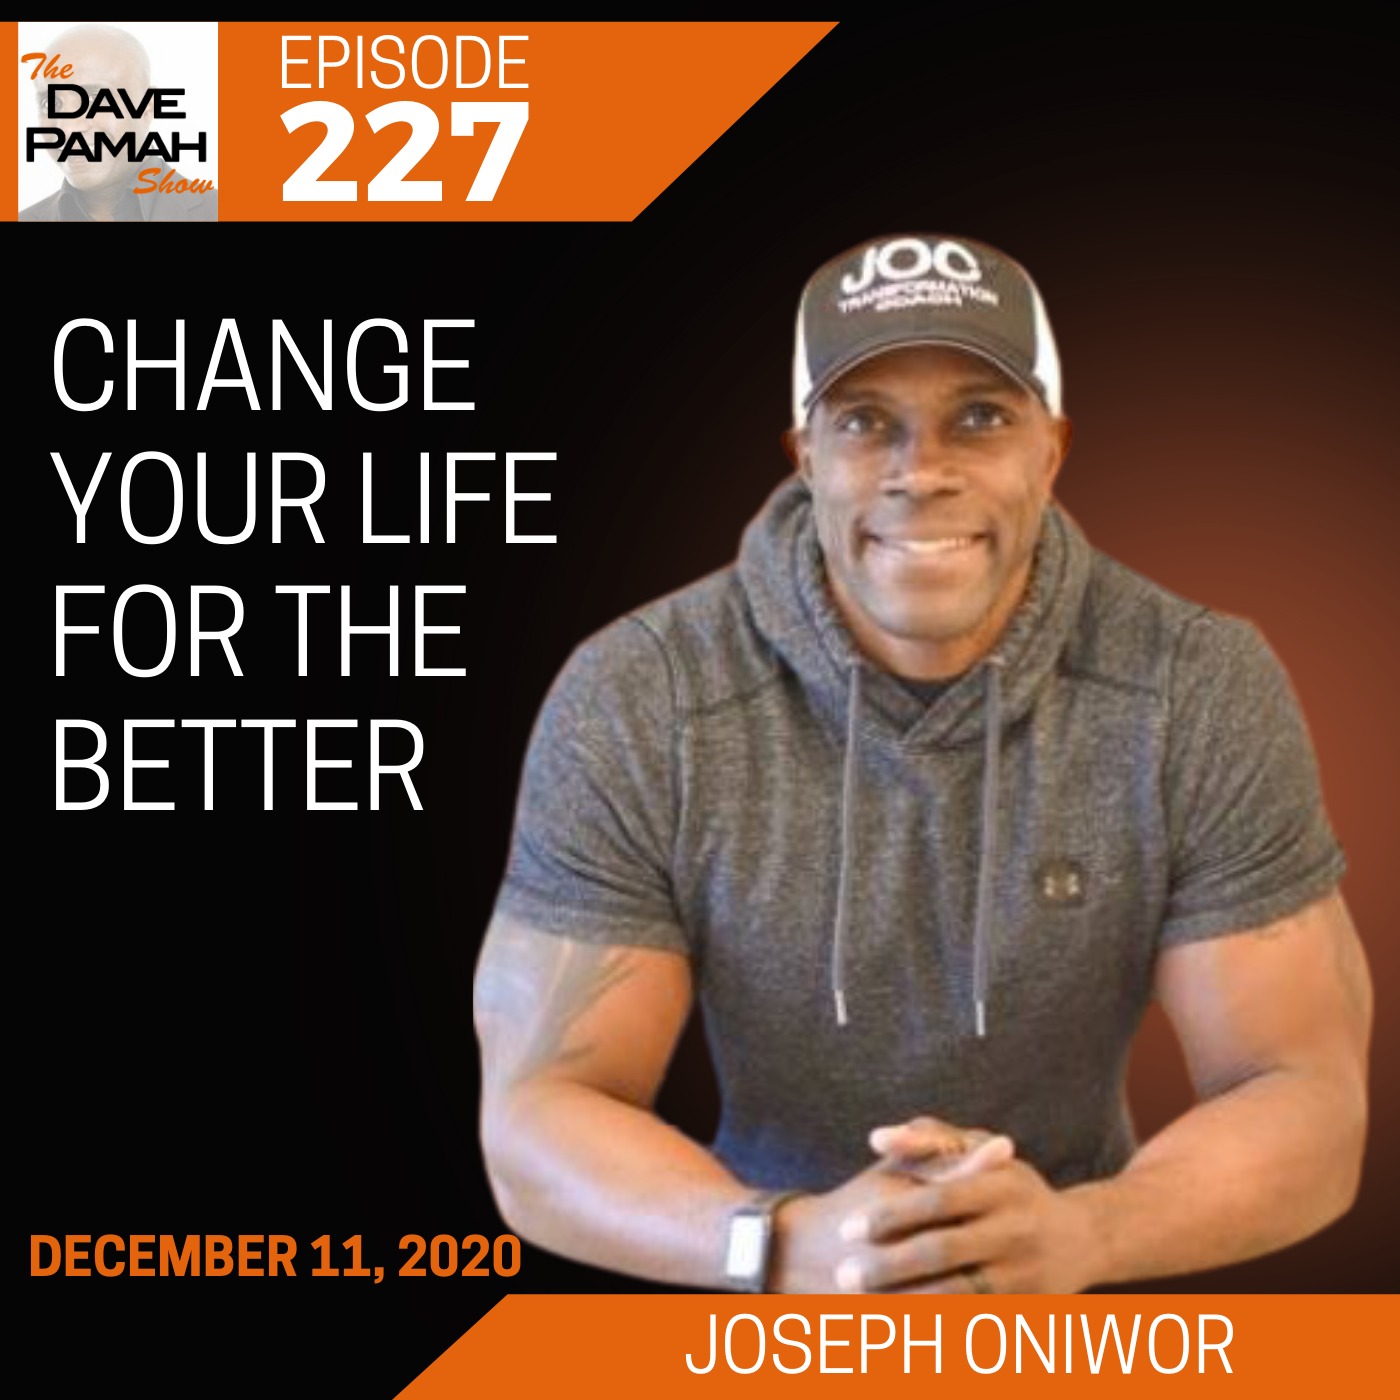 Change your life for the better with Joseph Oniwor